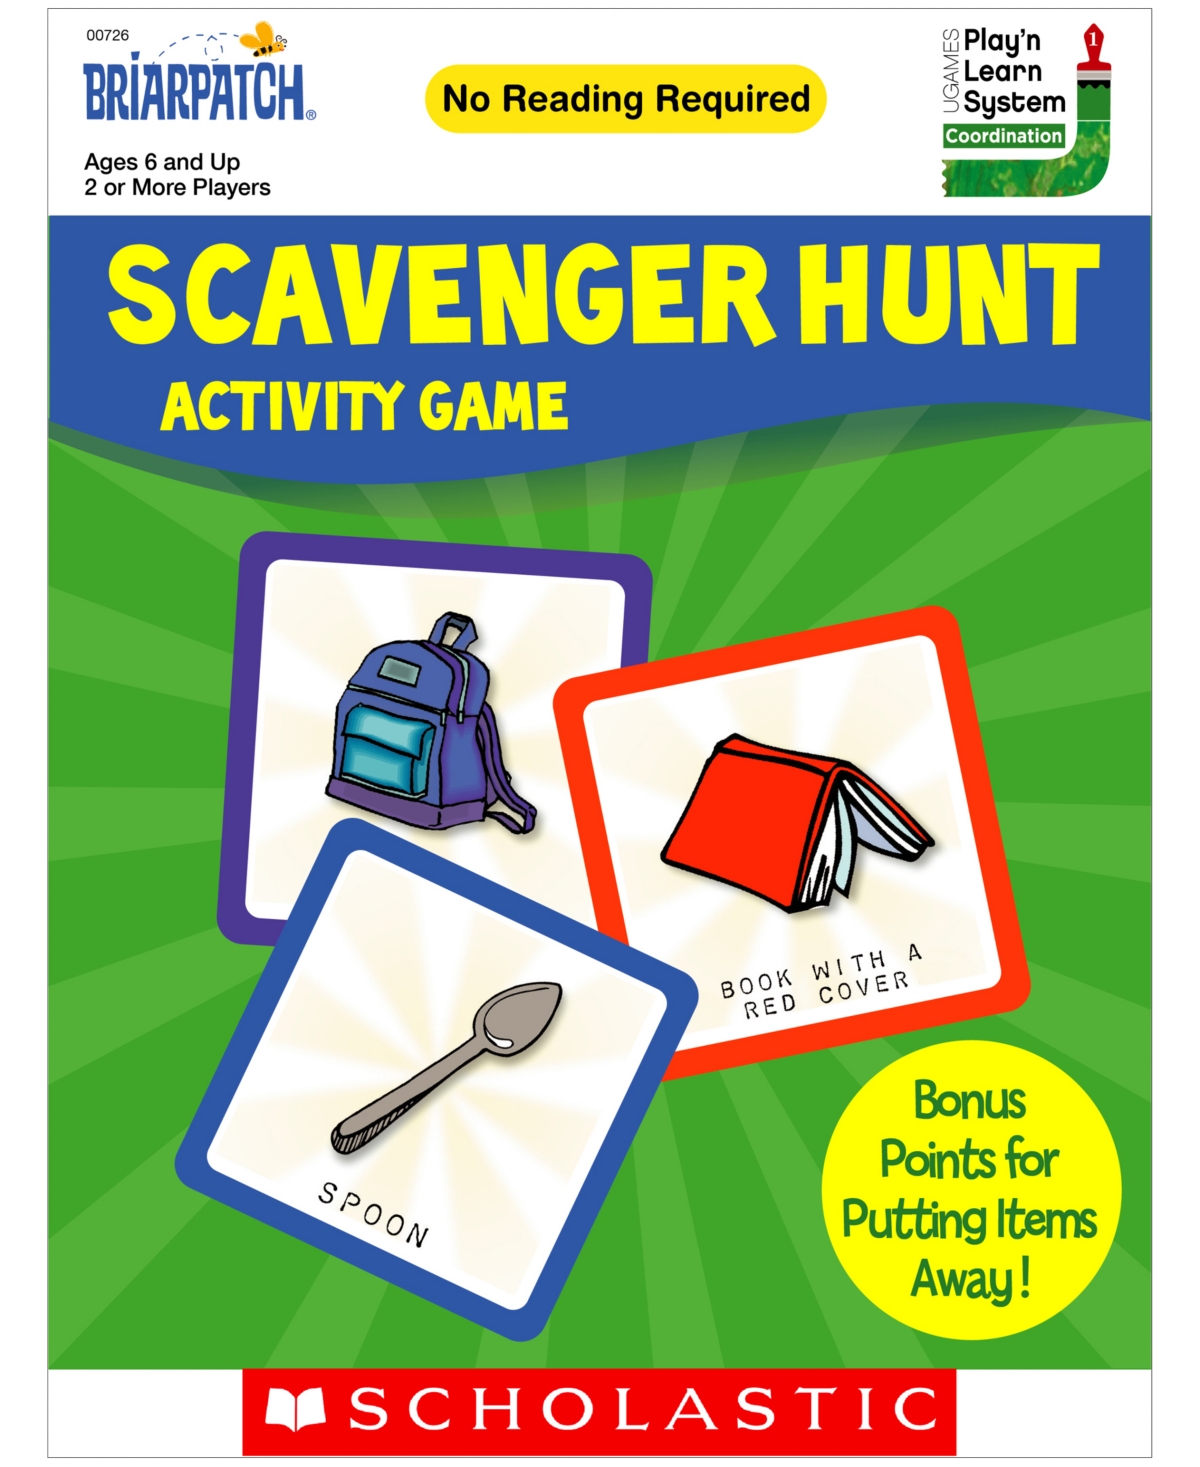 Shop Areyougame Briarpatch Scholastic Scavenger Hunt Activity Game In Multi Color